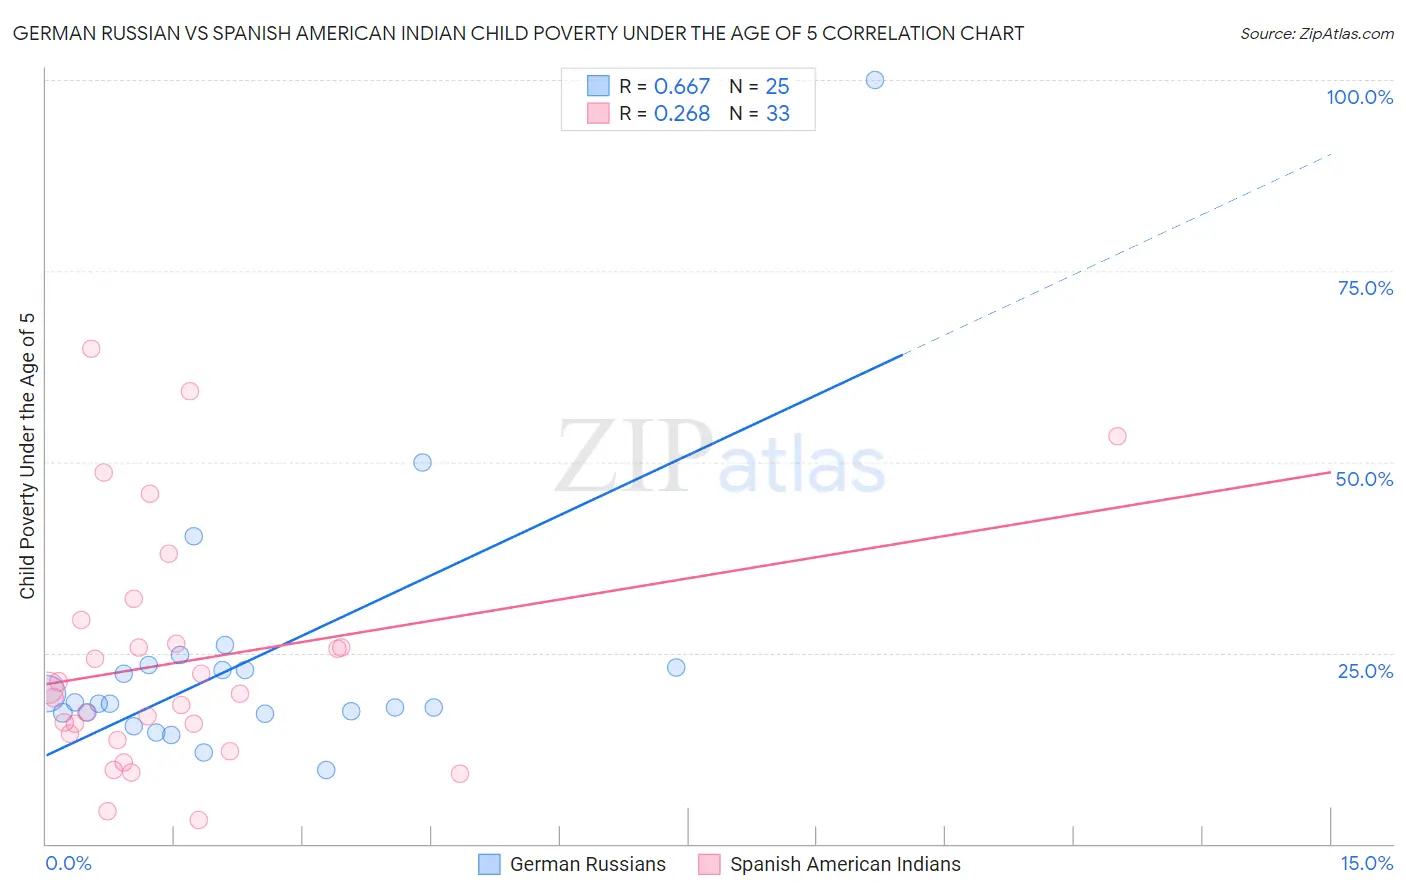 German Russian vs Spanish American Indian Child Poverty Under the Age of 5